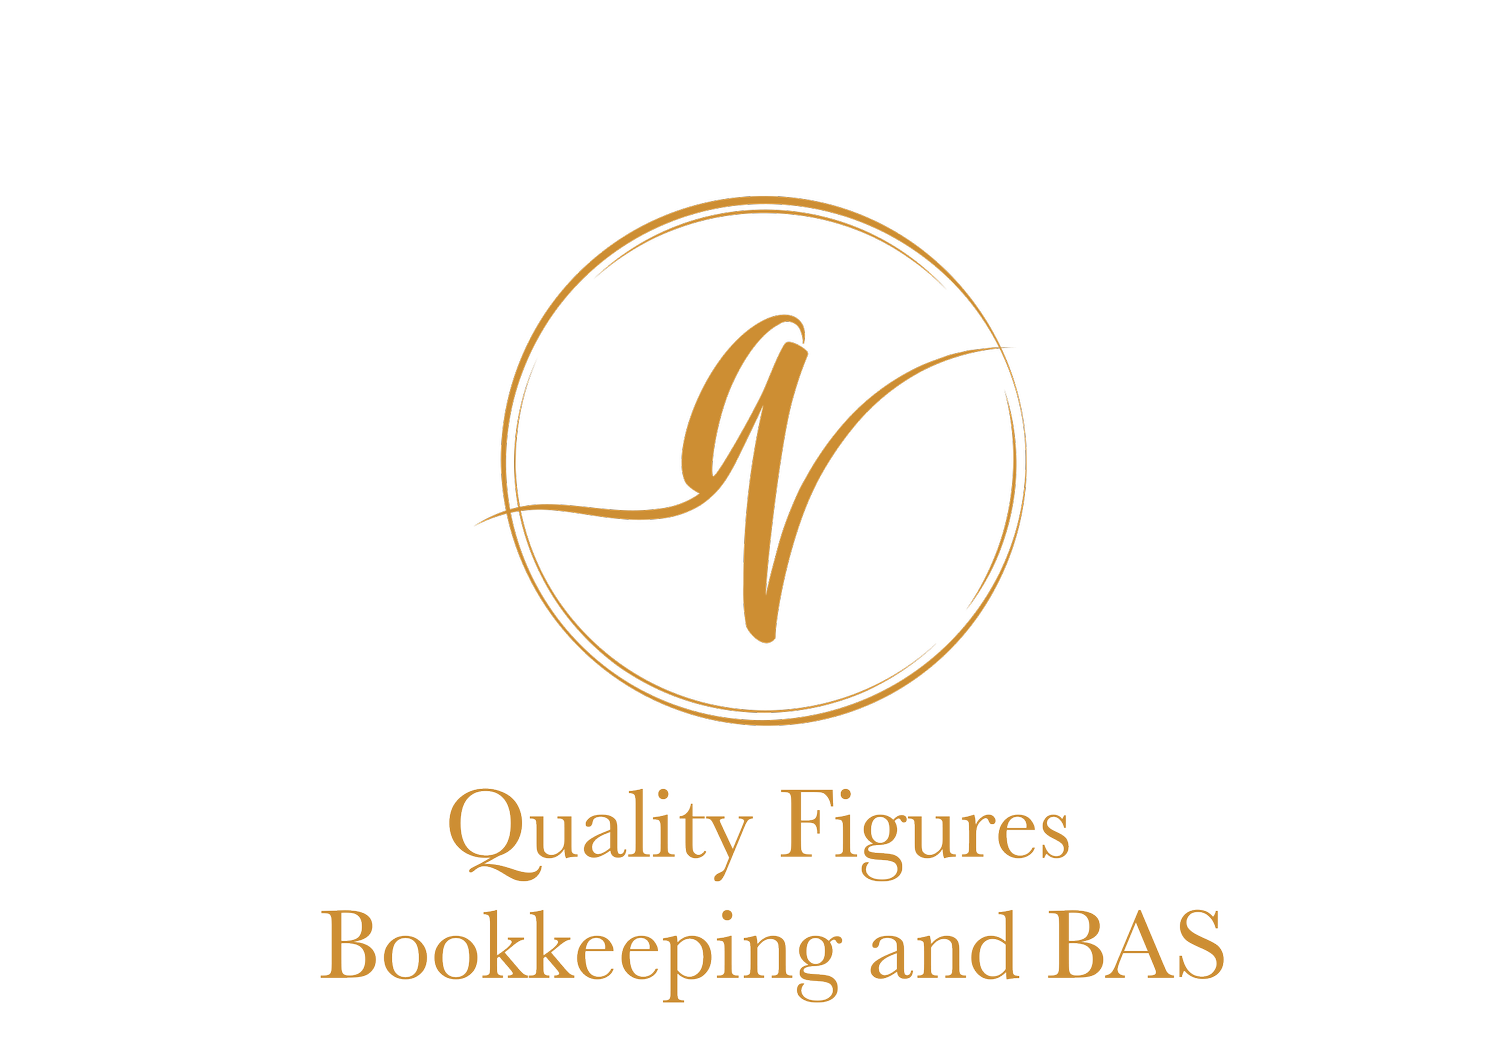 Quality Figures Bookkeeping and BAS